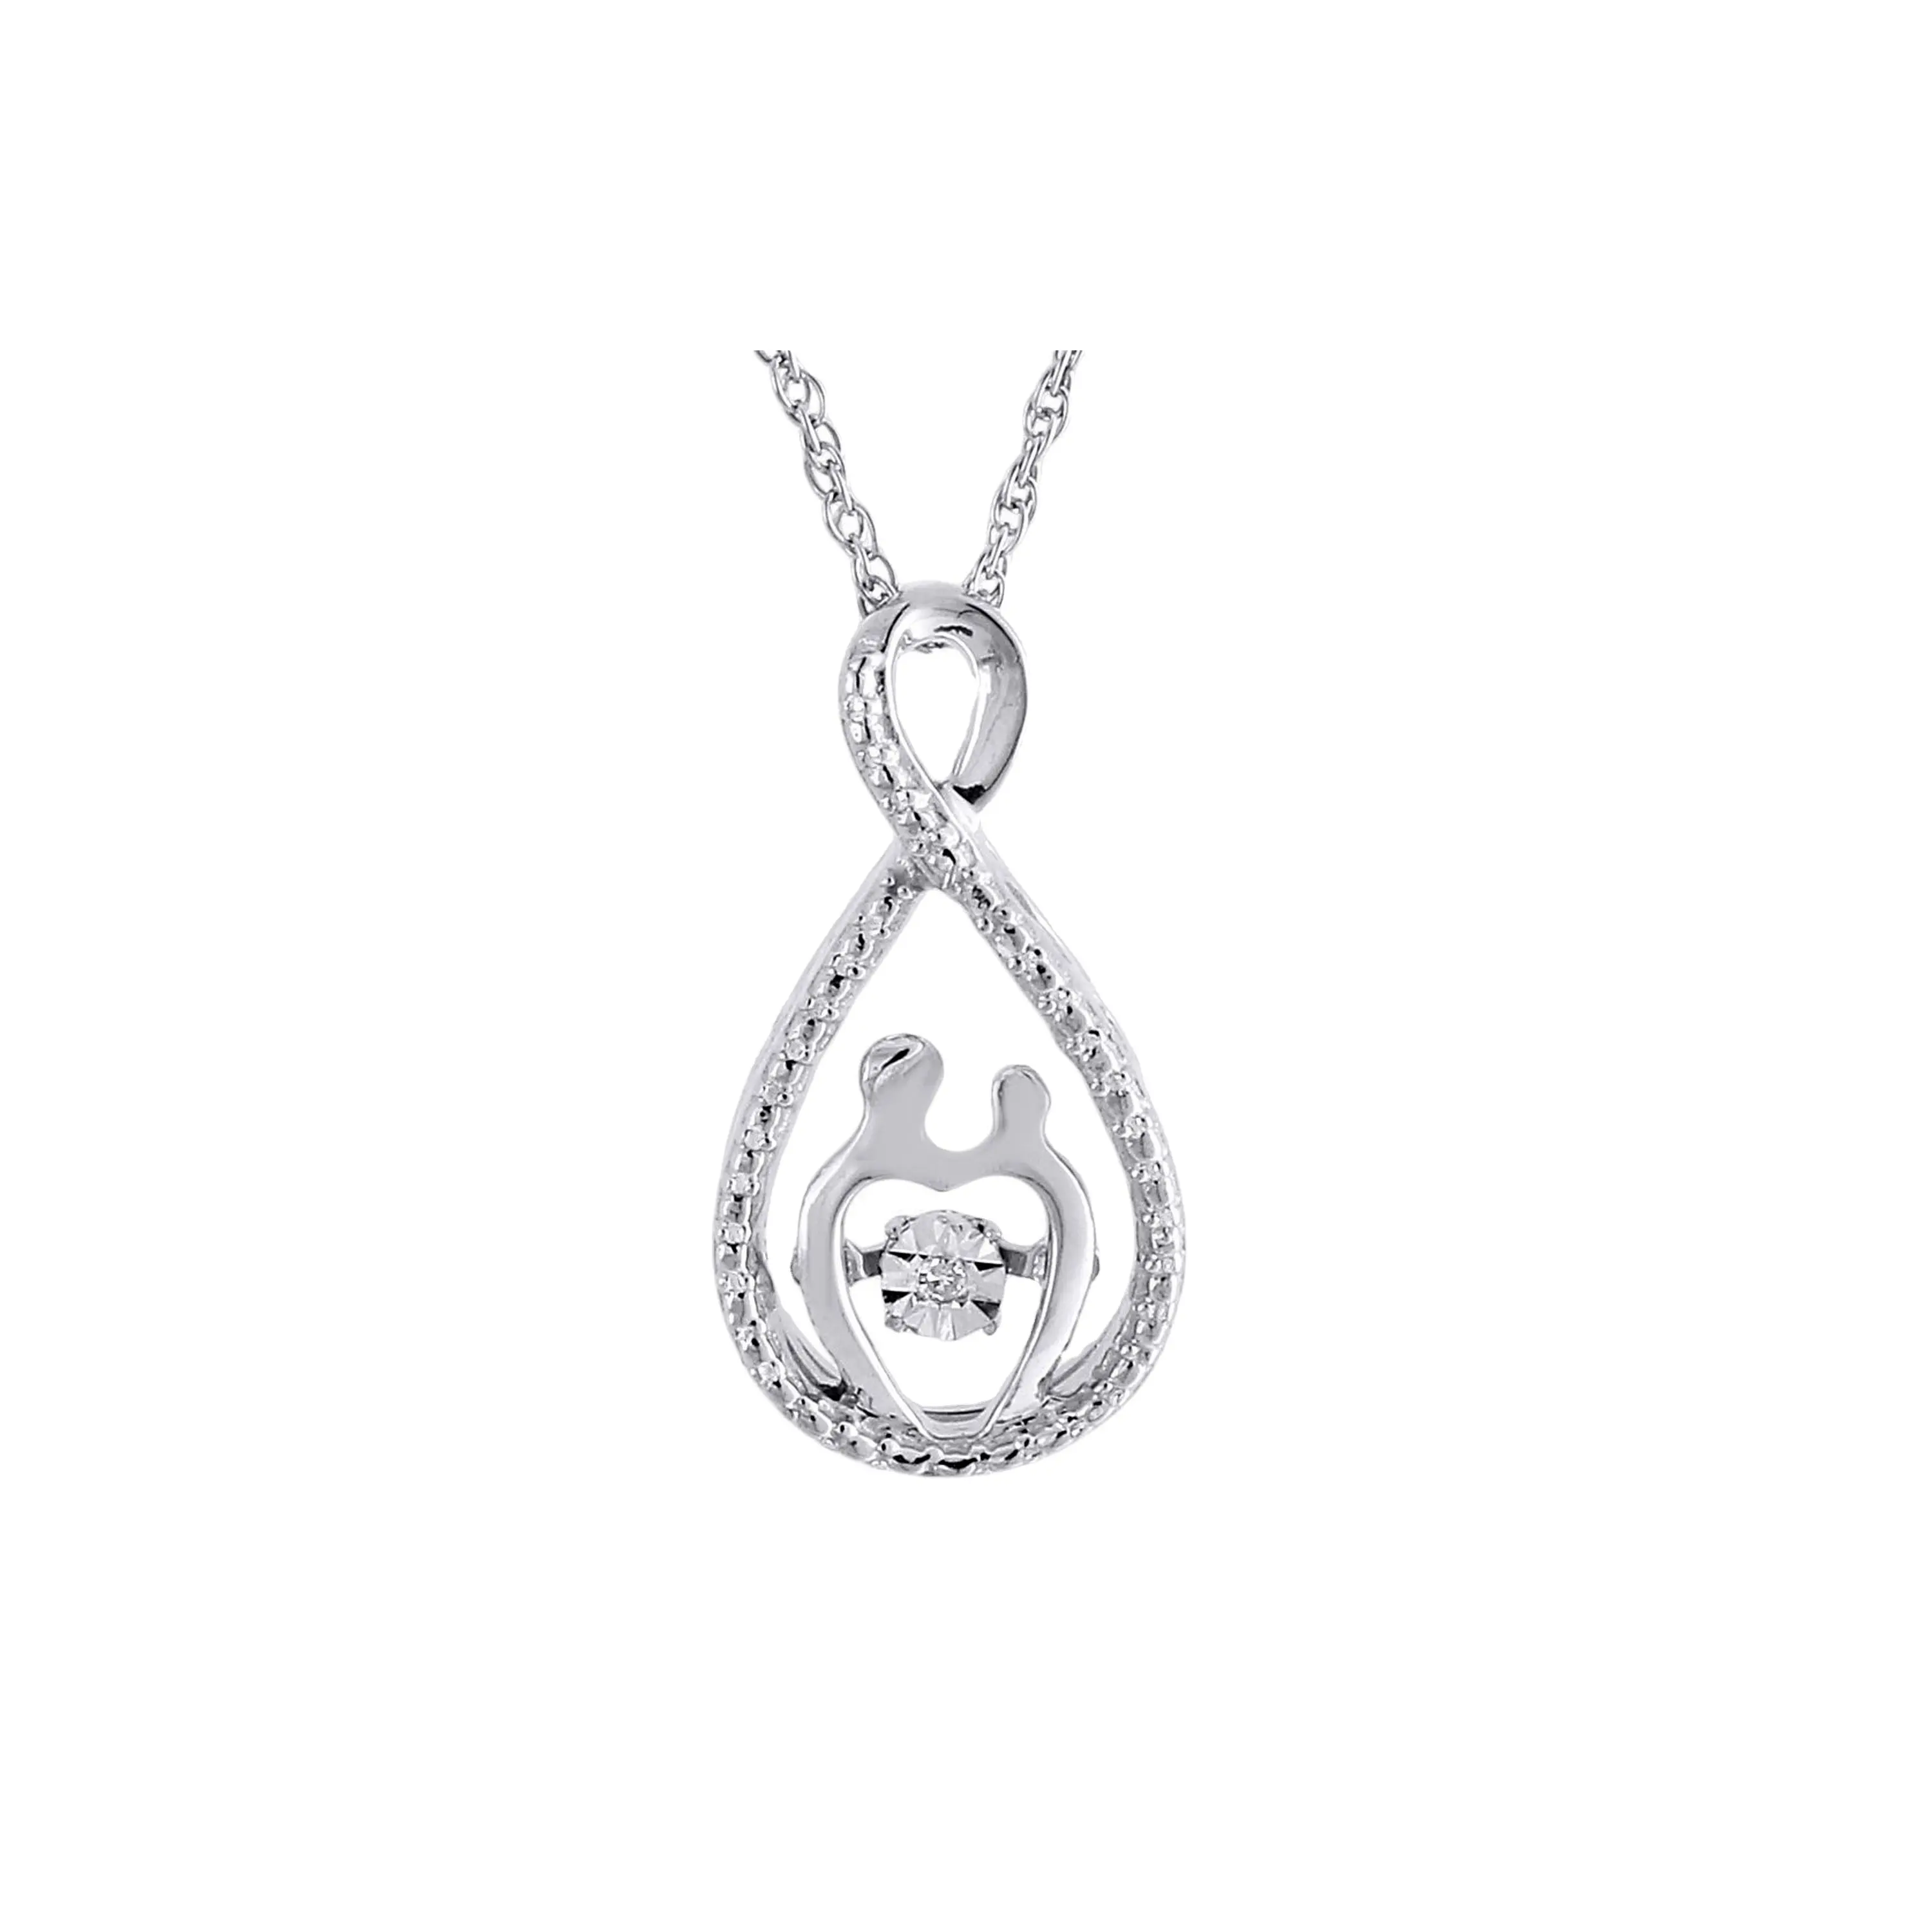 Fancy Infinite 925 Silver Mon And Son Charm Necklace Love Pendant For Children